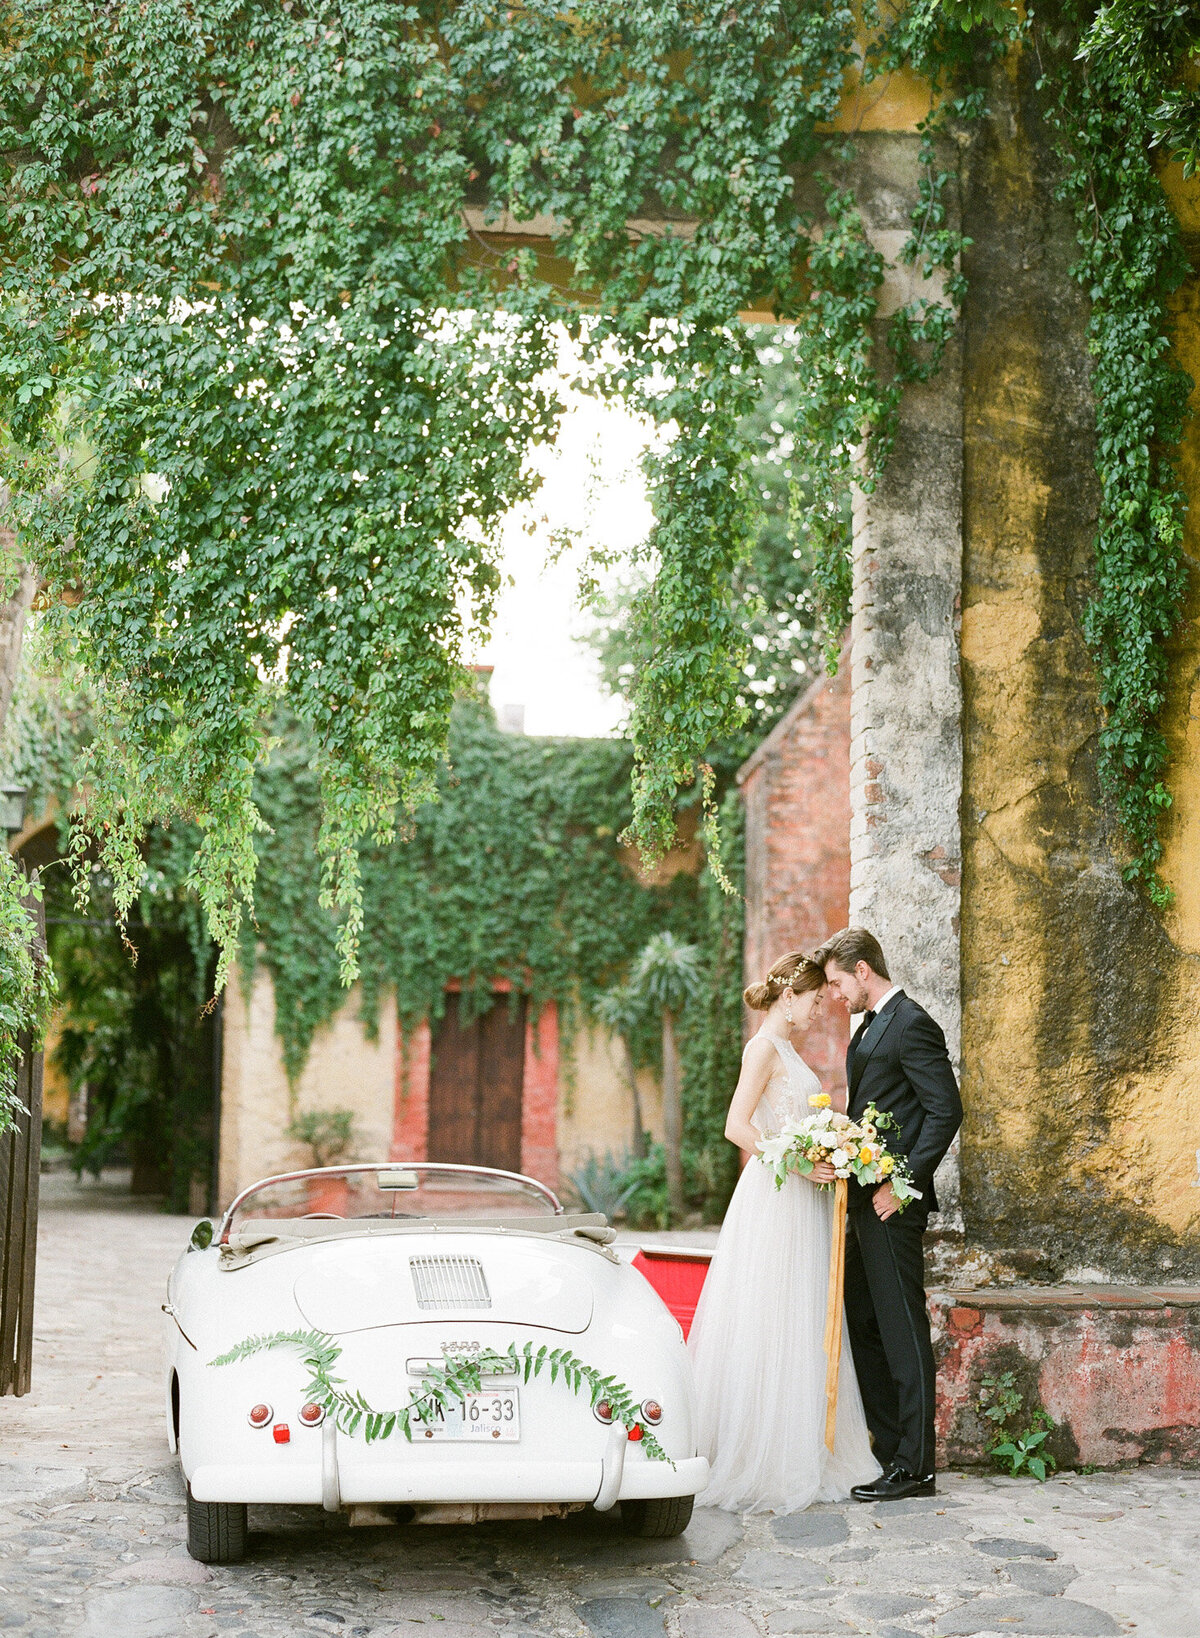 Elegantly dressed bride and groom lean towards each other beside a vintage wedding car in front of walls engulfed by leaves.